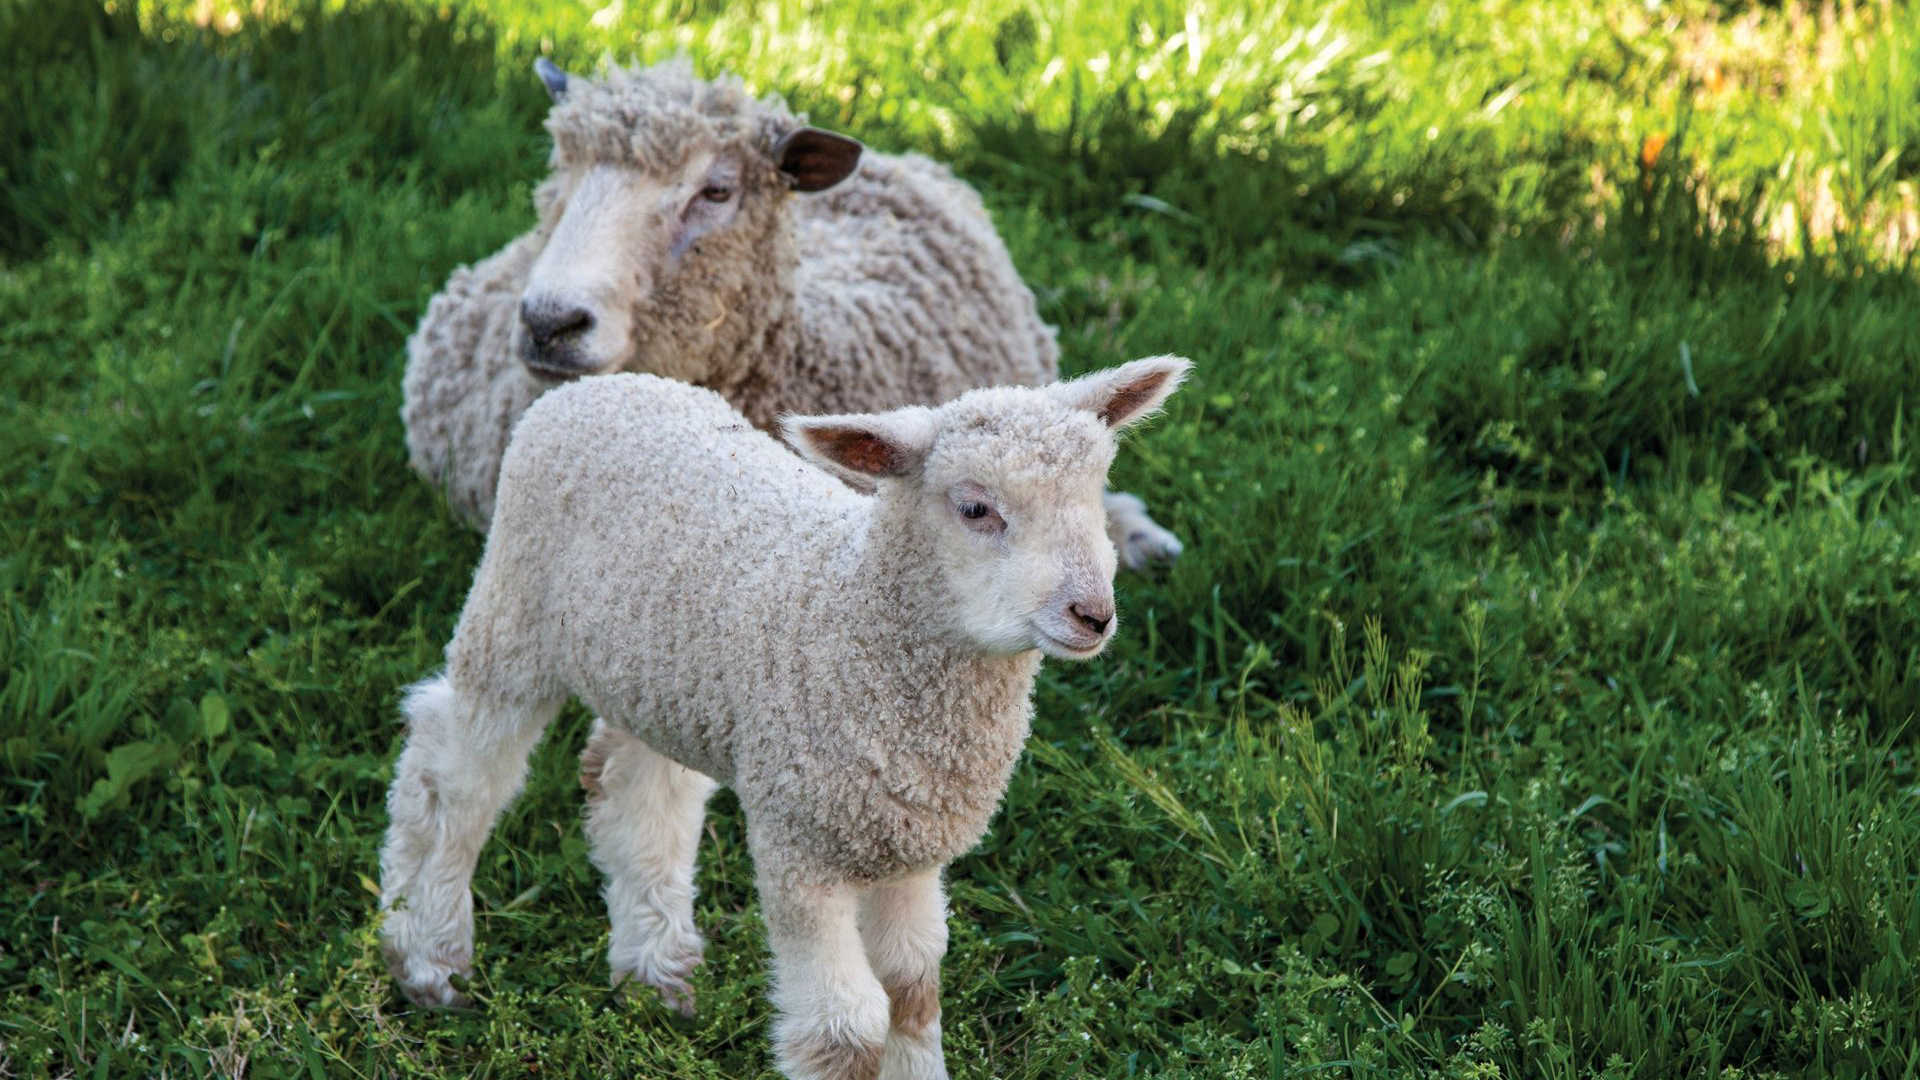 A photo of a lamb and sheep in a field